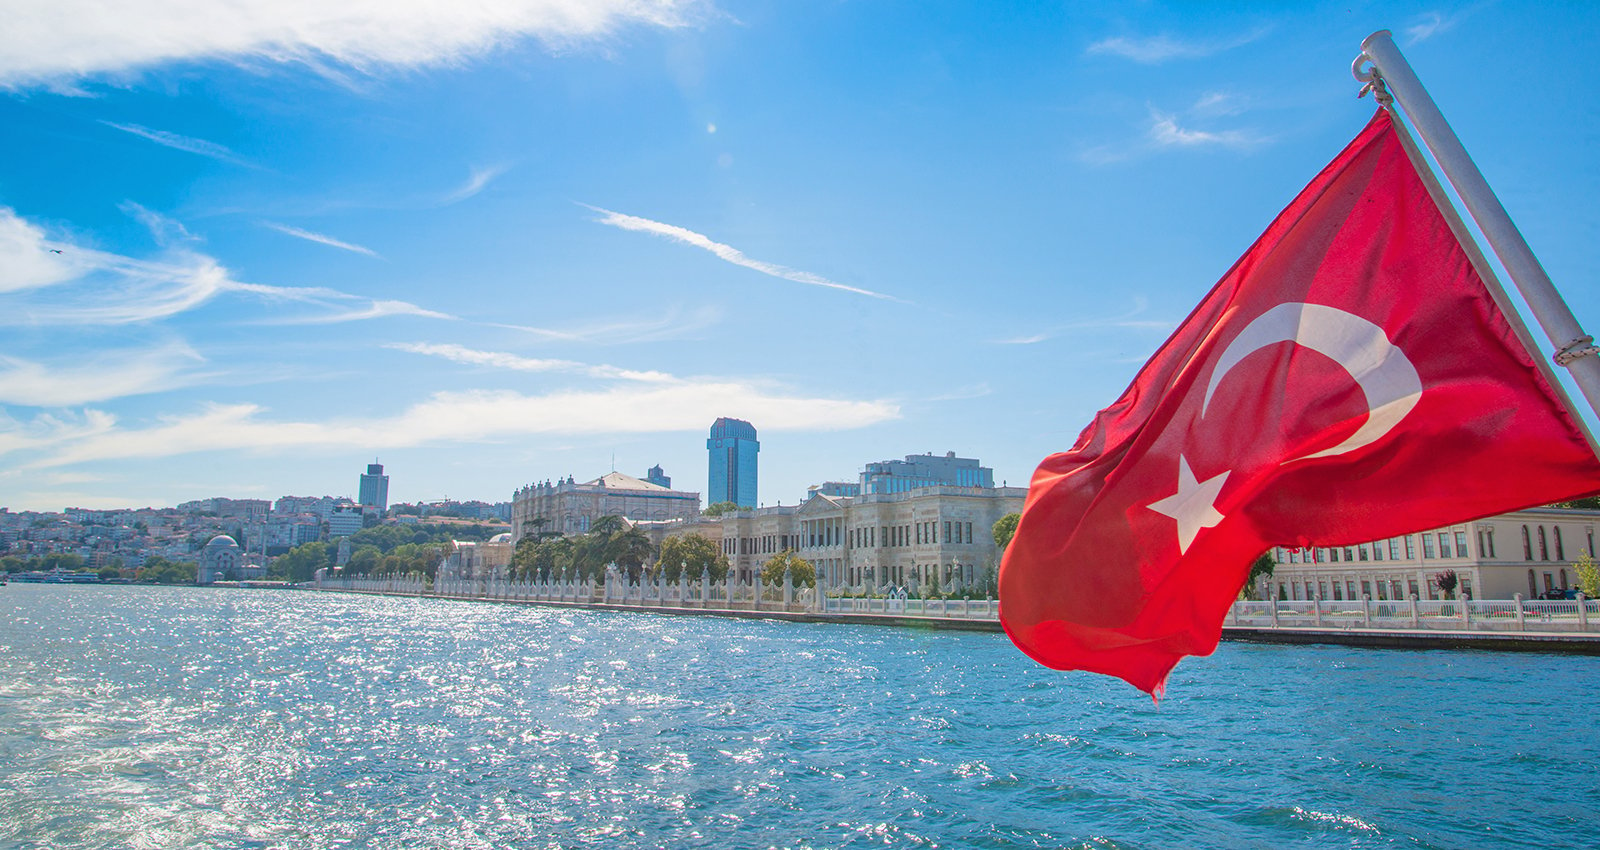 Turkish passport allows visa-free access to 110+ countries in the world including Singapore and Hong Kong